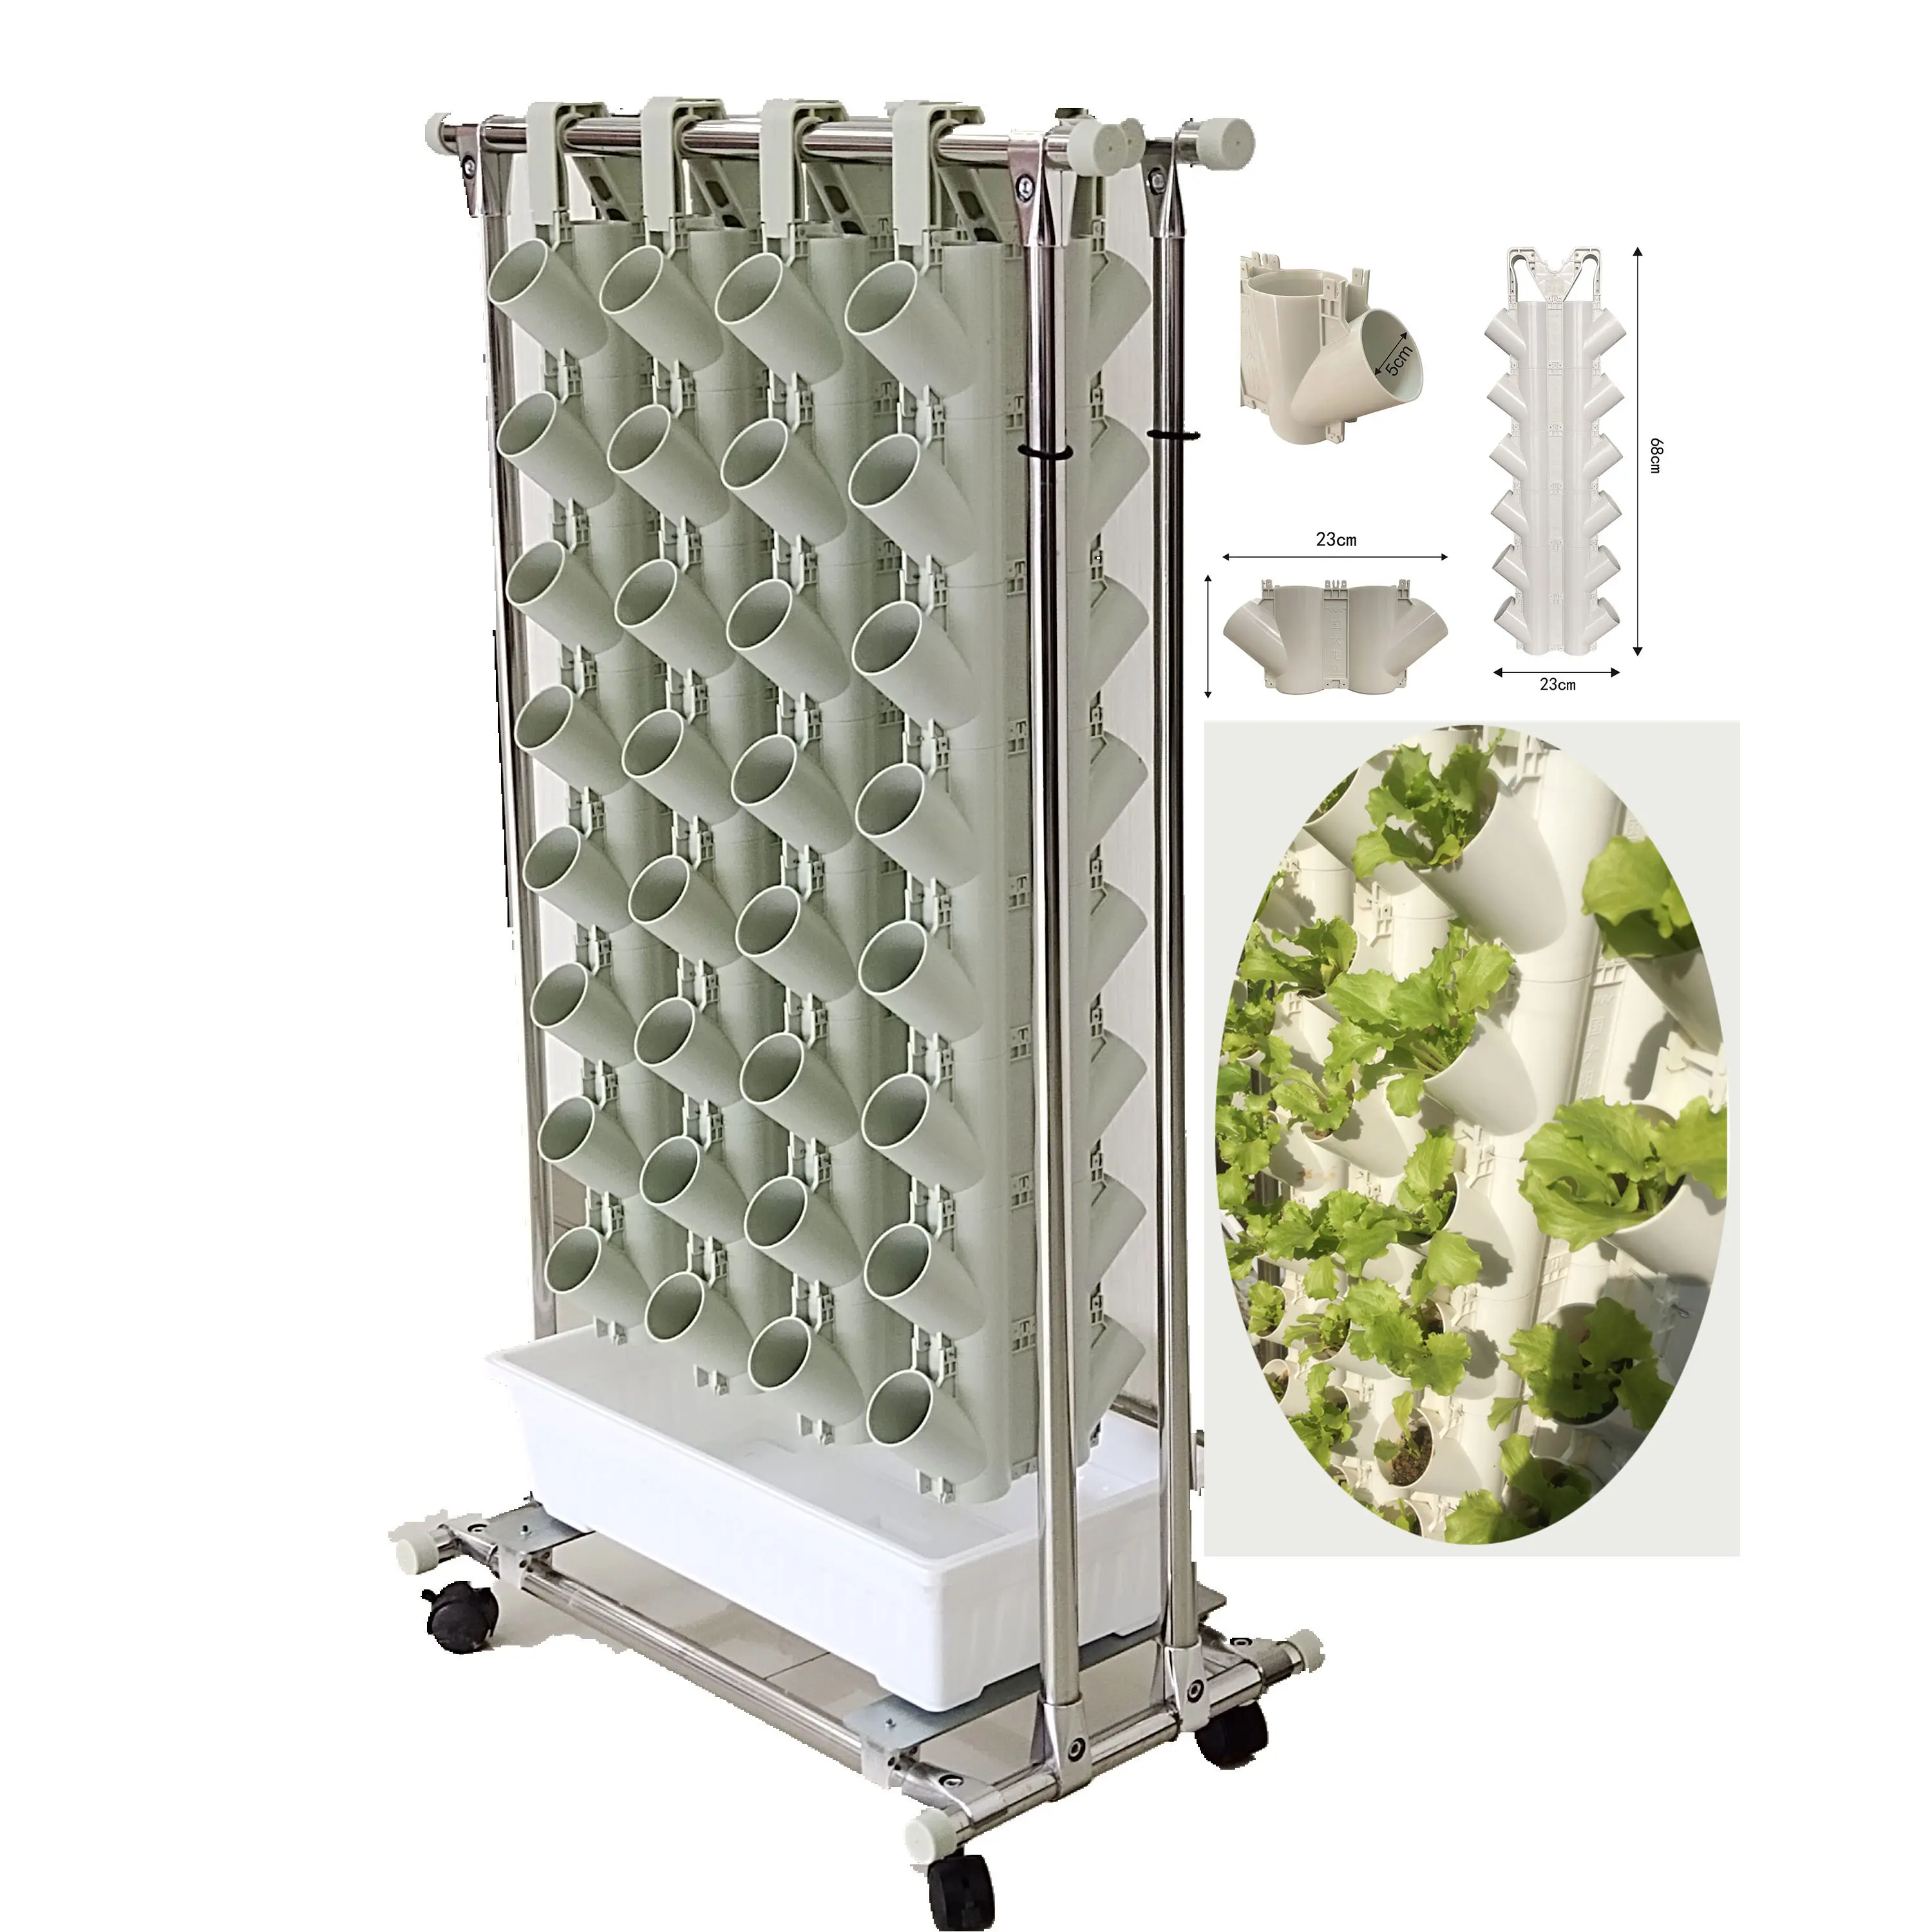 Low Cost New Agriculture Greenhouse Vertical Hydroponic Growing System Home Garden Vegetable growing device